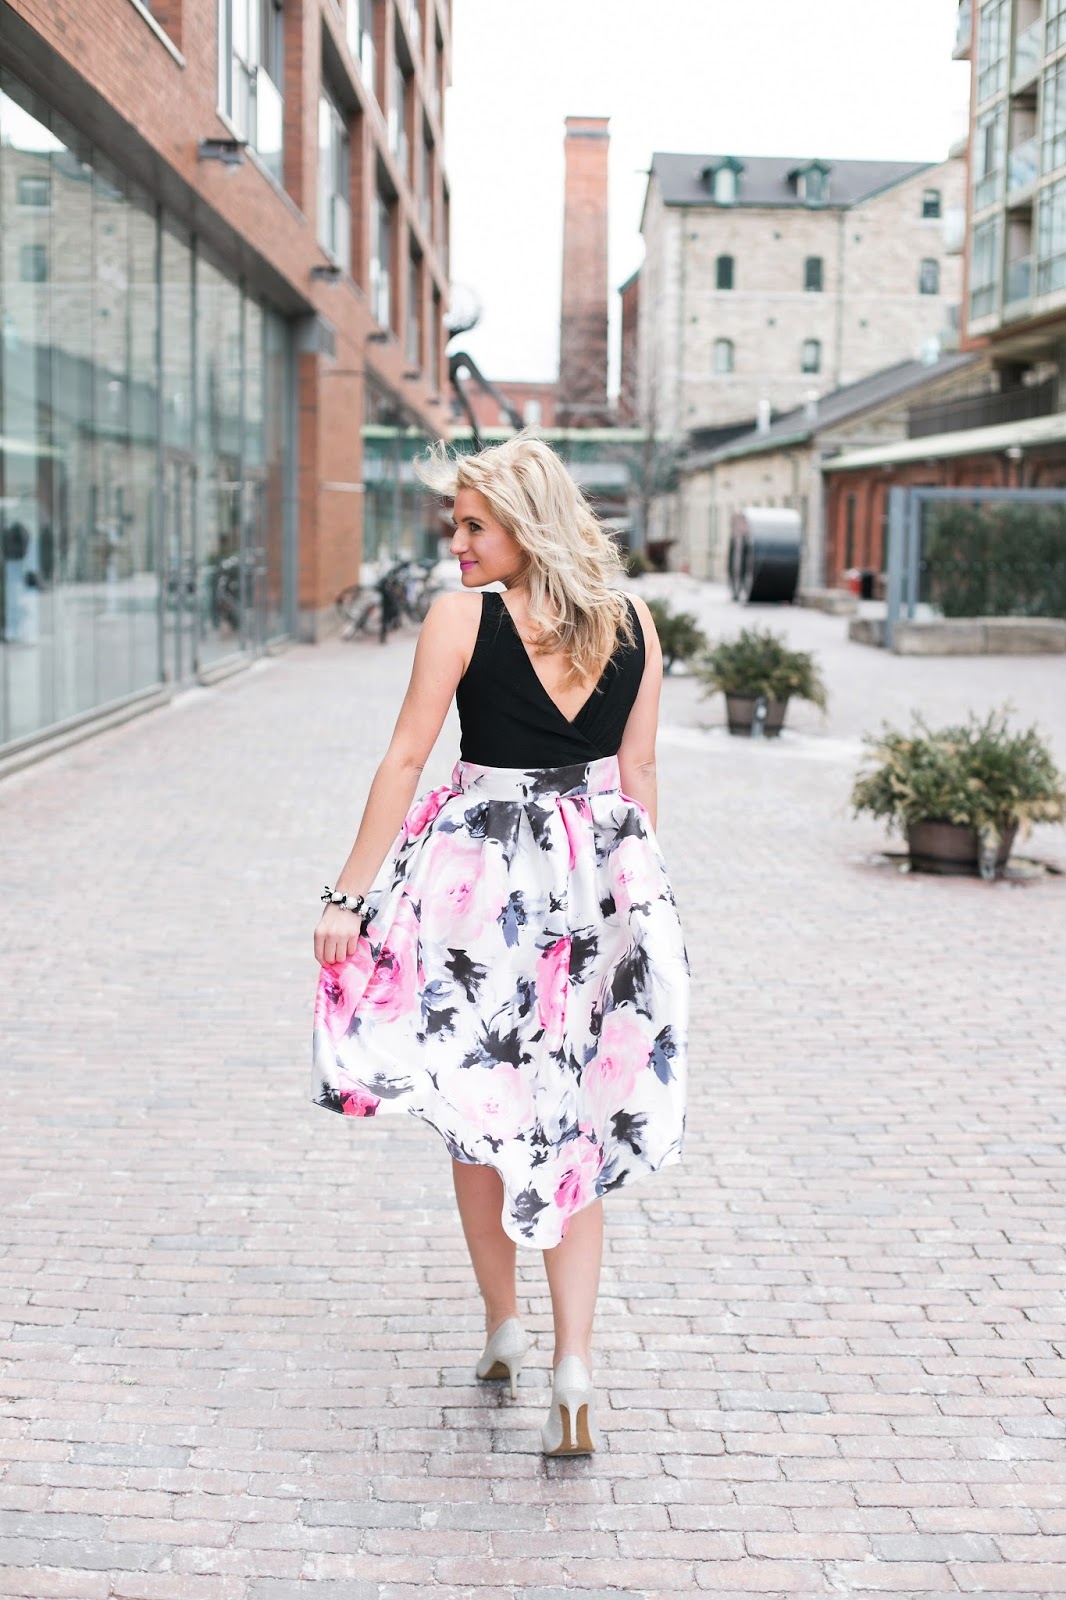 Bijuleni - Floral high and low Dress, Faux Fur Zara Vest and sparkly heels